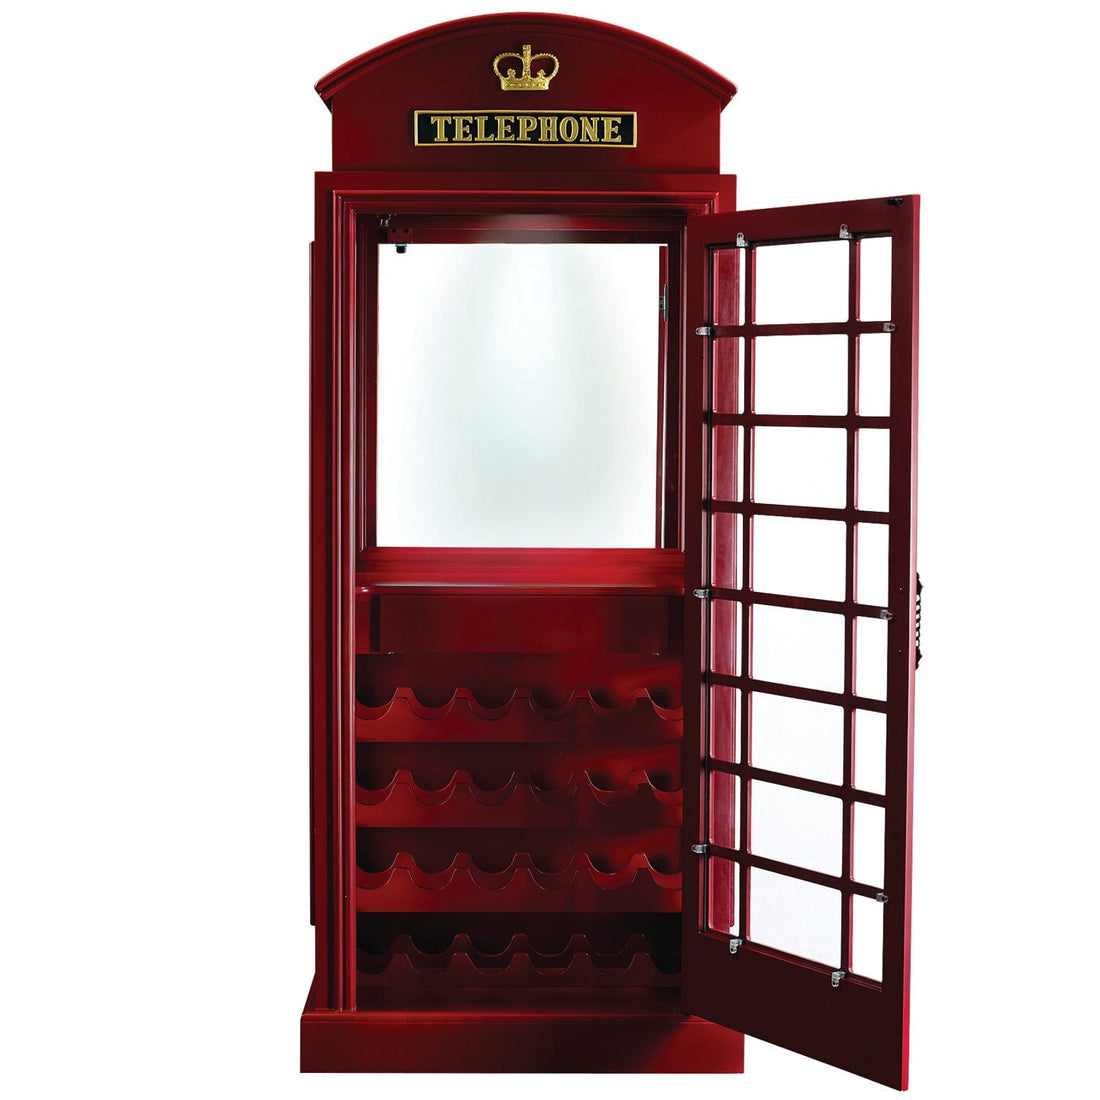 RAM Game Room Old English Telephone Booth Bar Cabinet - Atomic Game Store